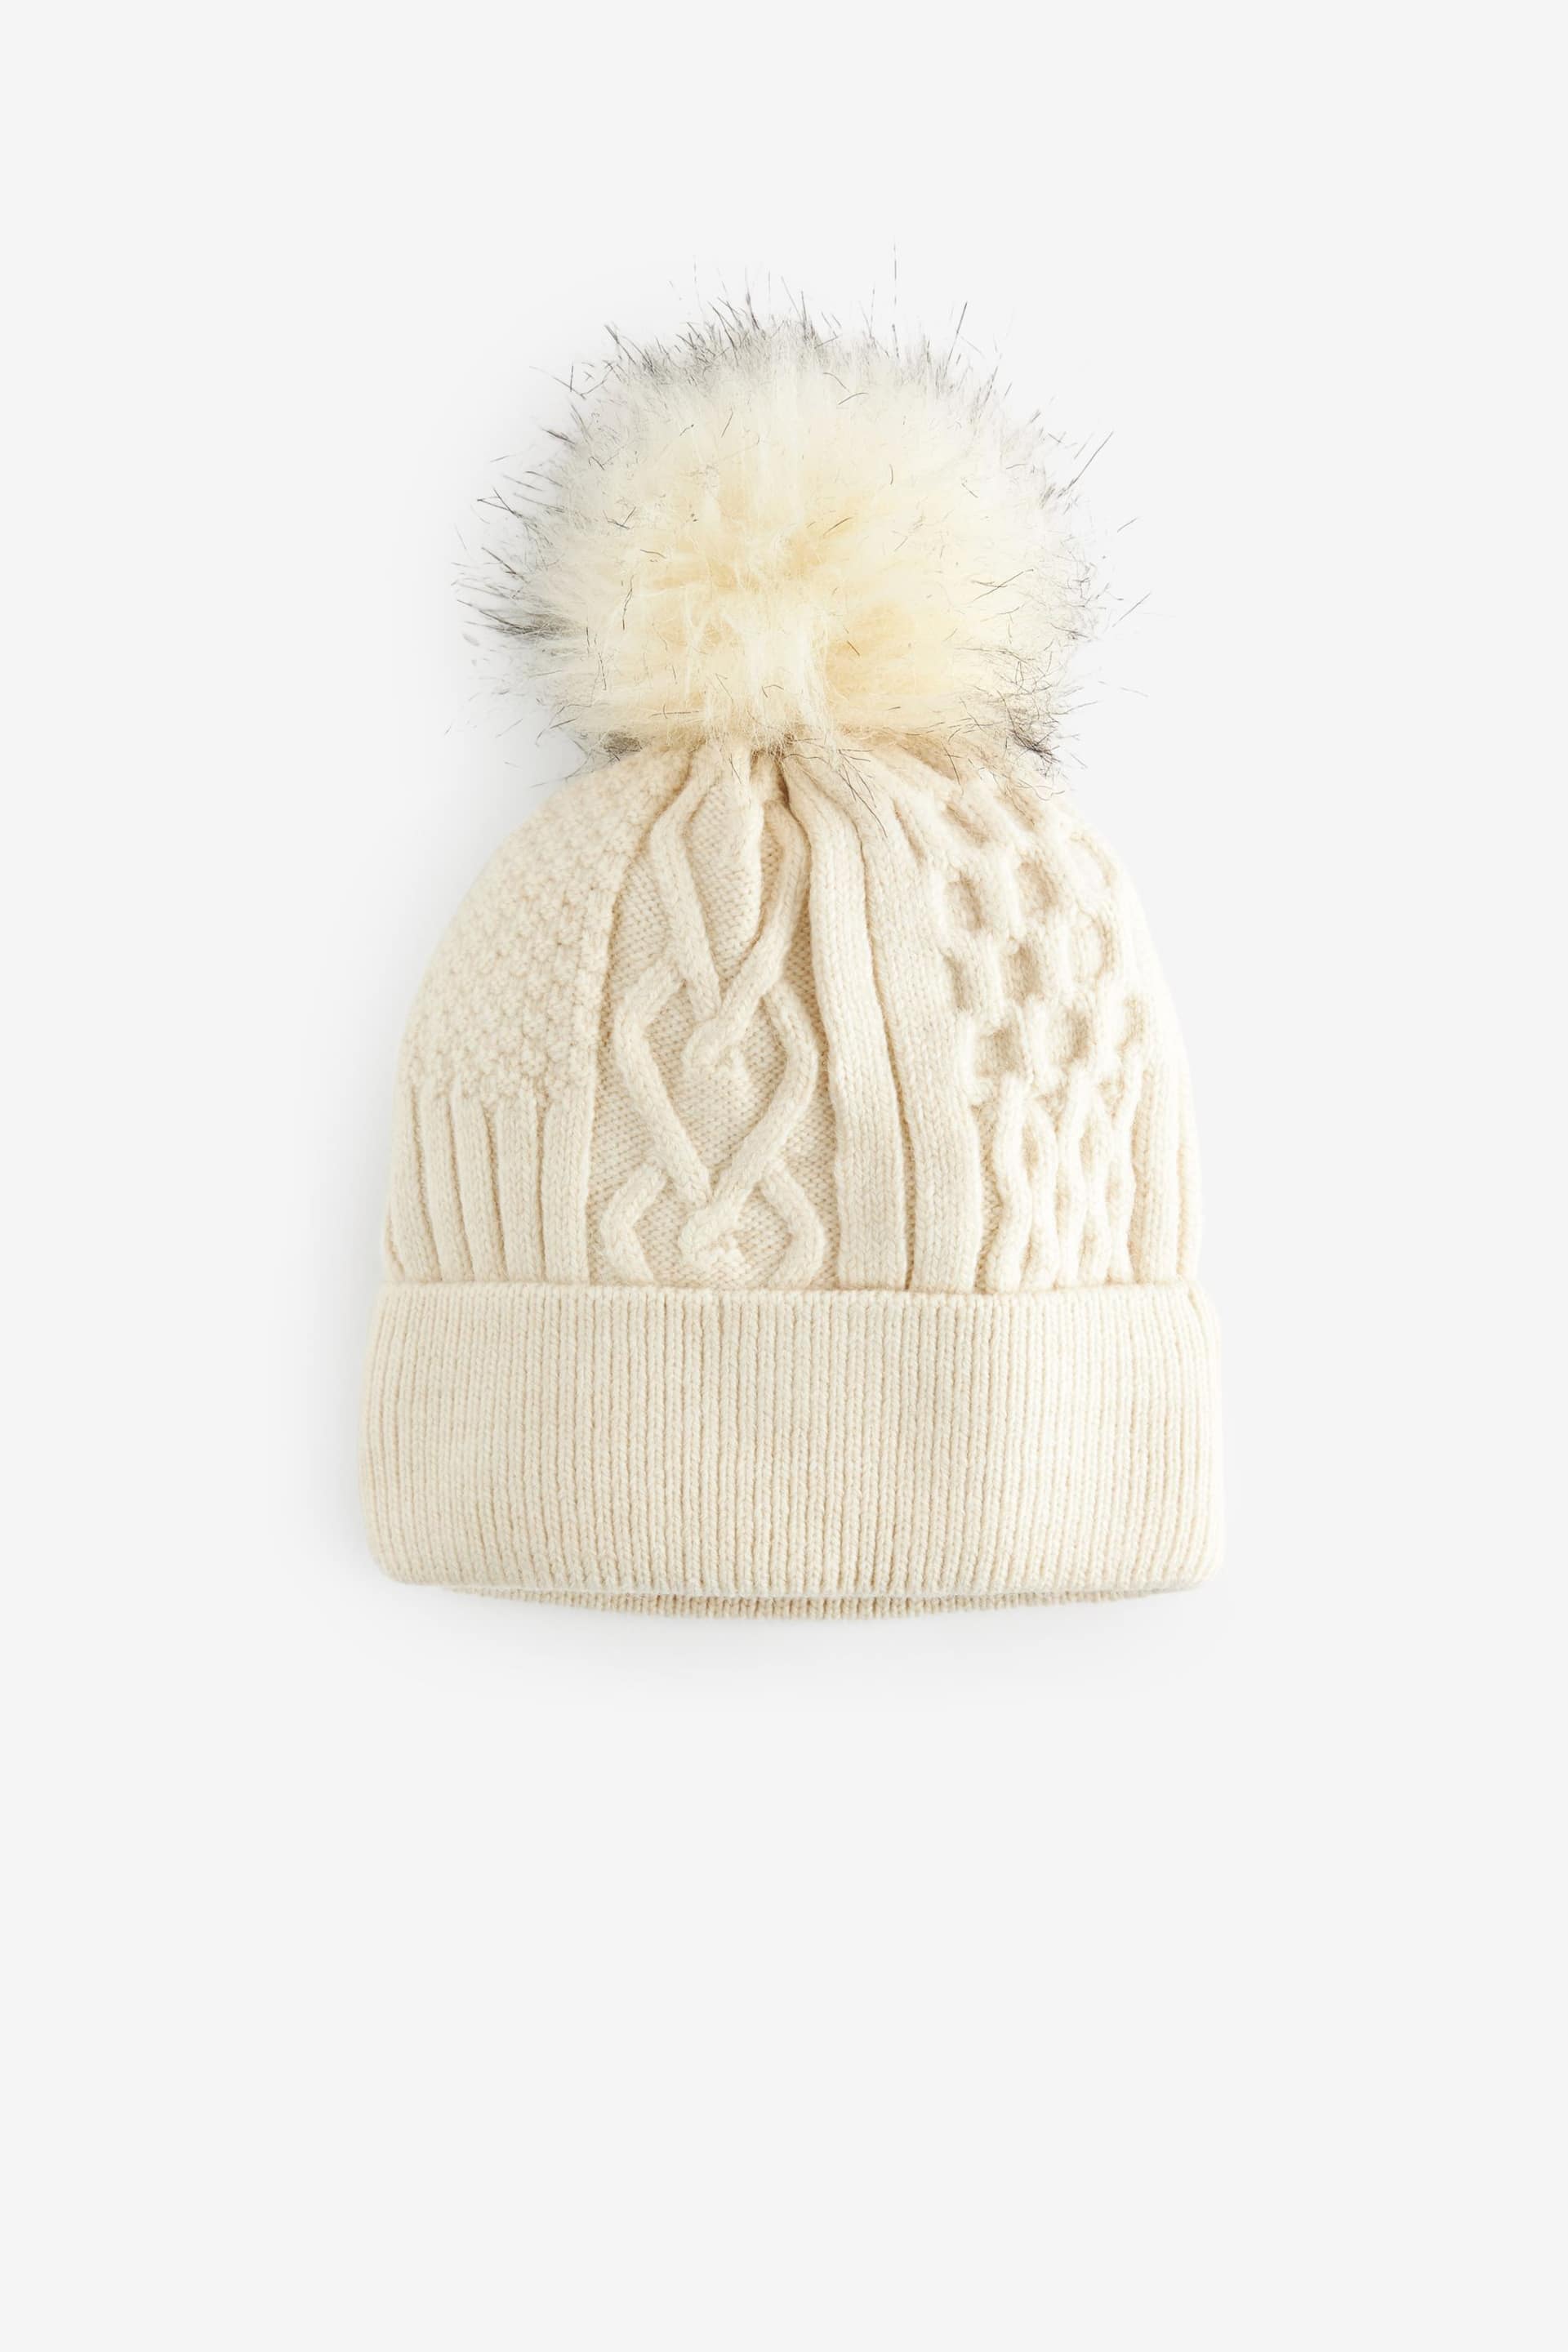 Cream Patchwork Heart Cable Knit Pom Hat - Image 3 of 3